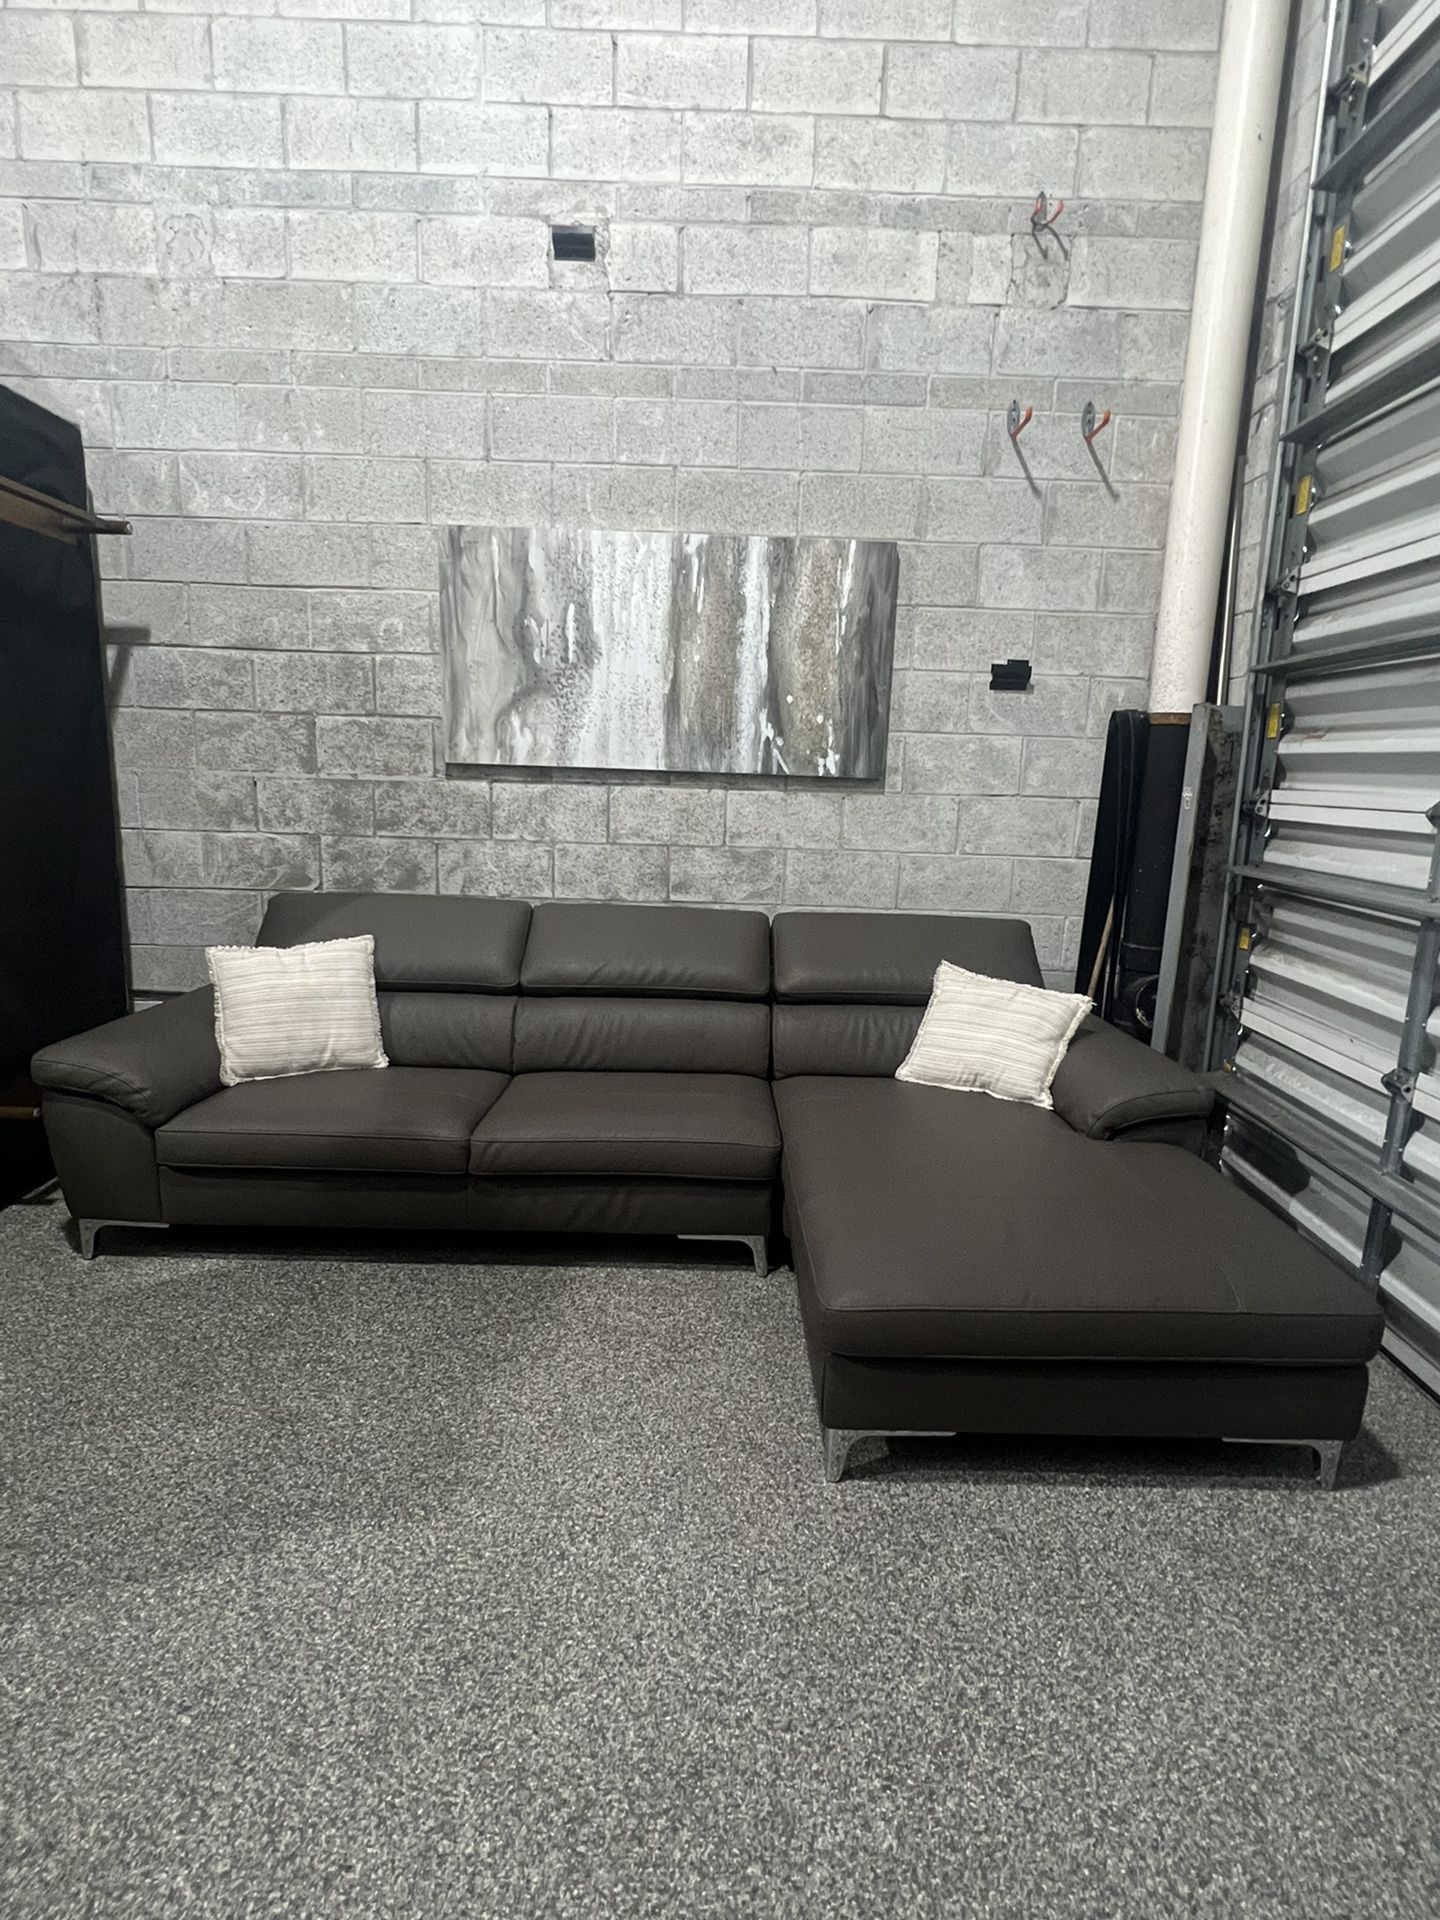 Gray Leather Sectional (Delivery available)